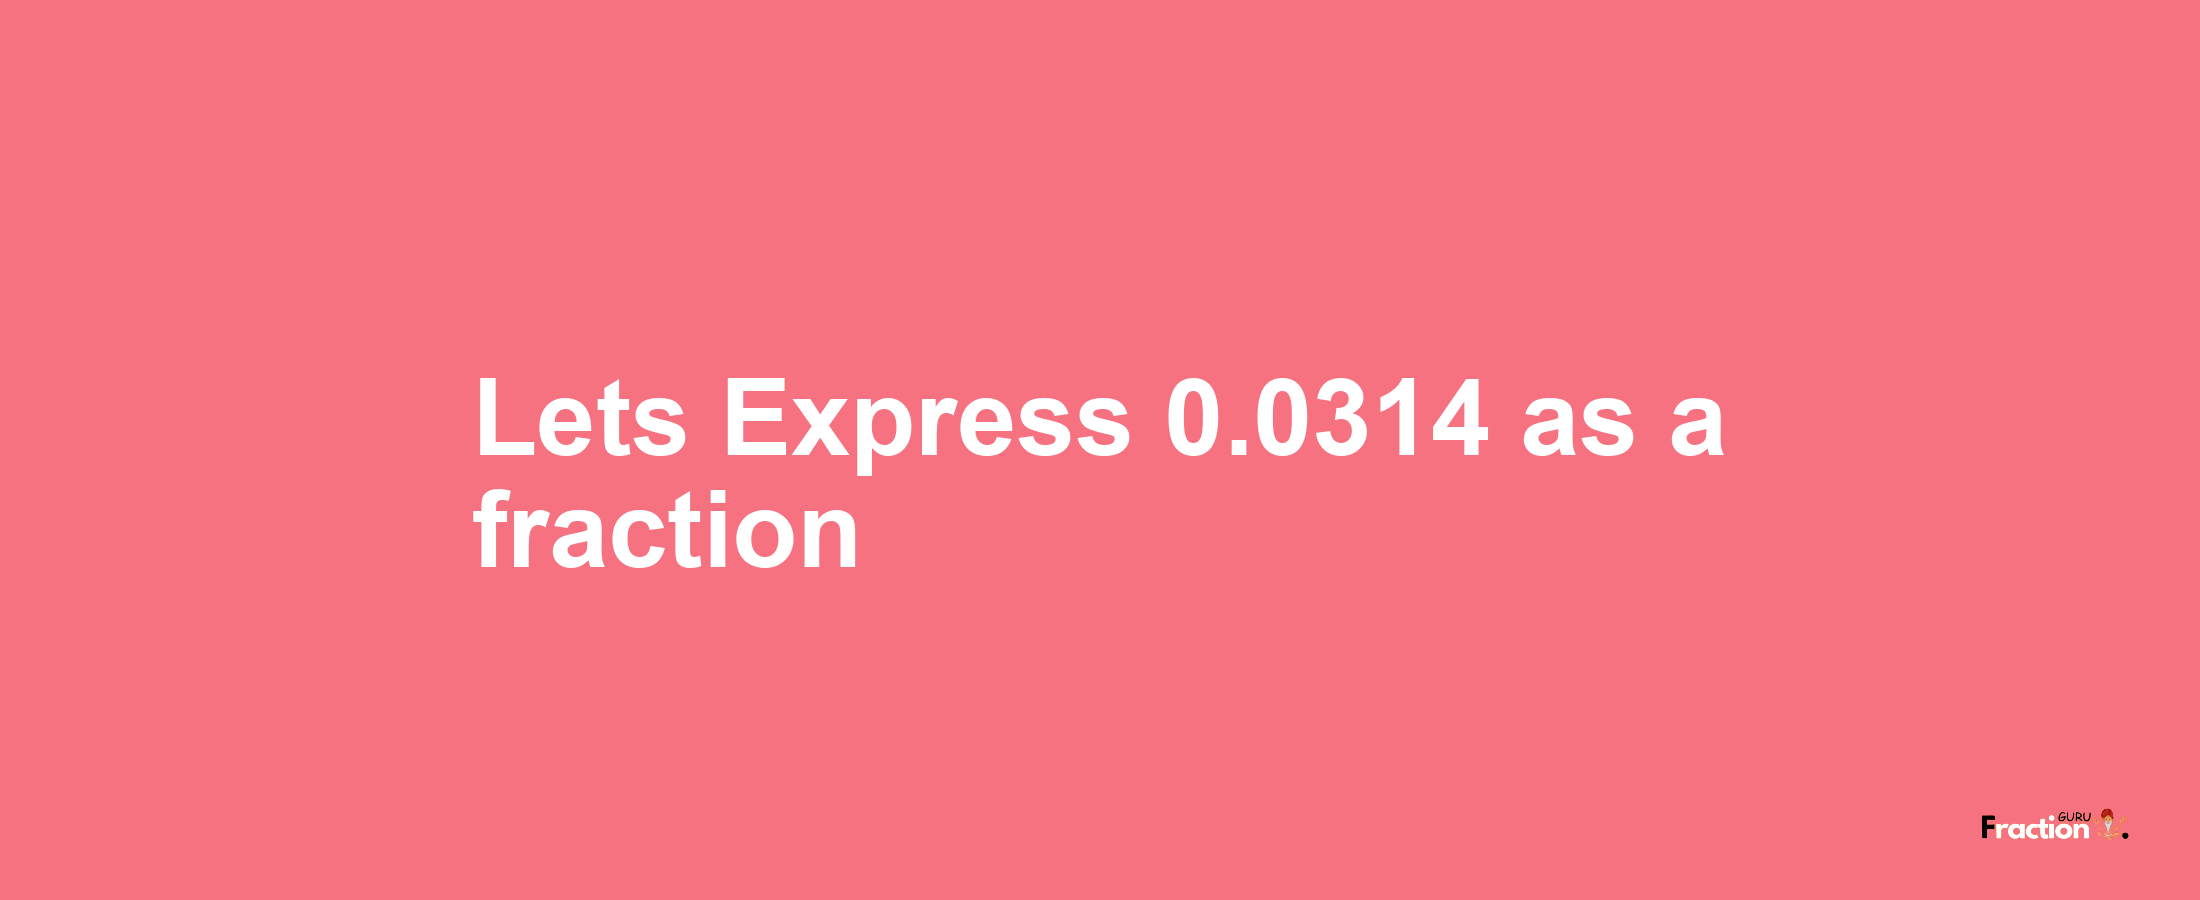 Lets Express 0.0314 as afraction